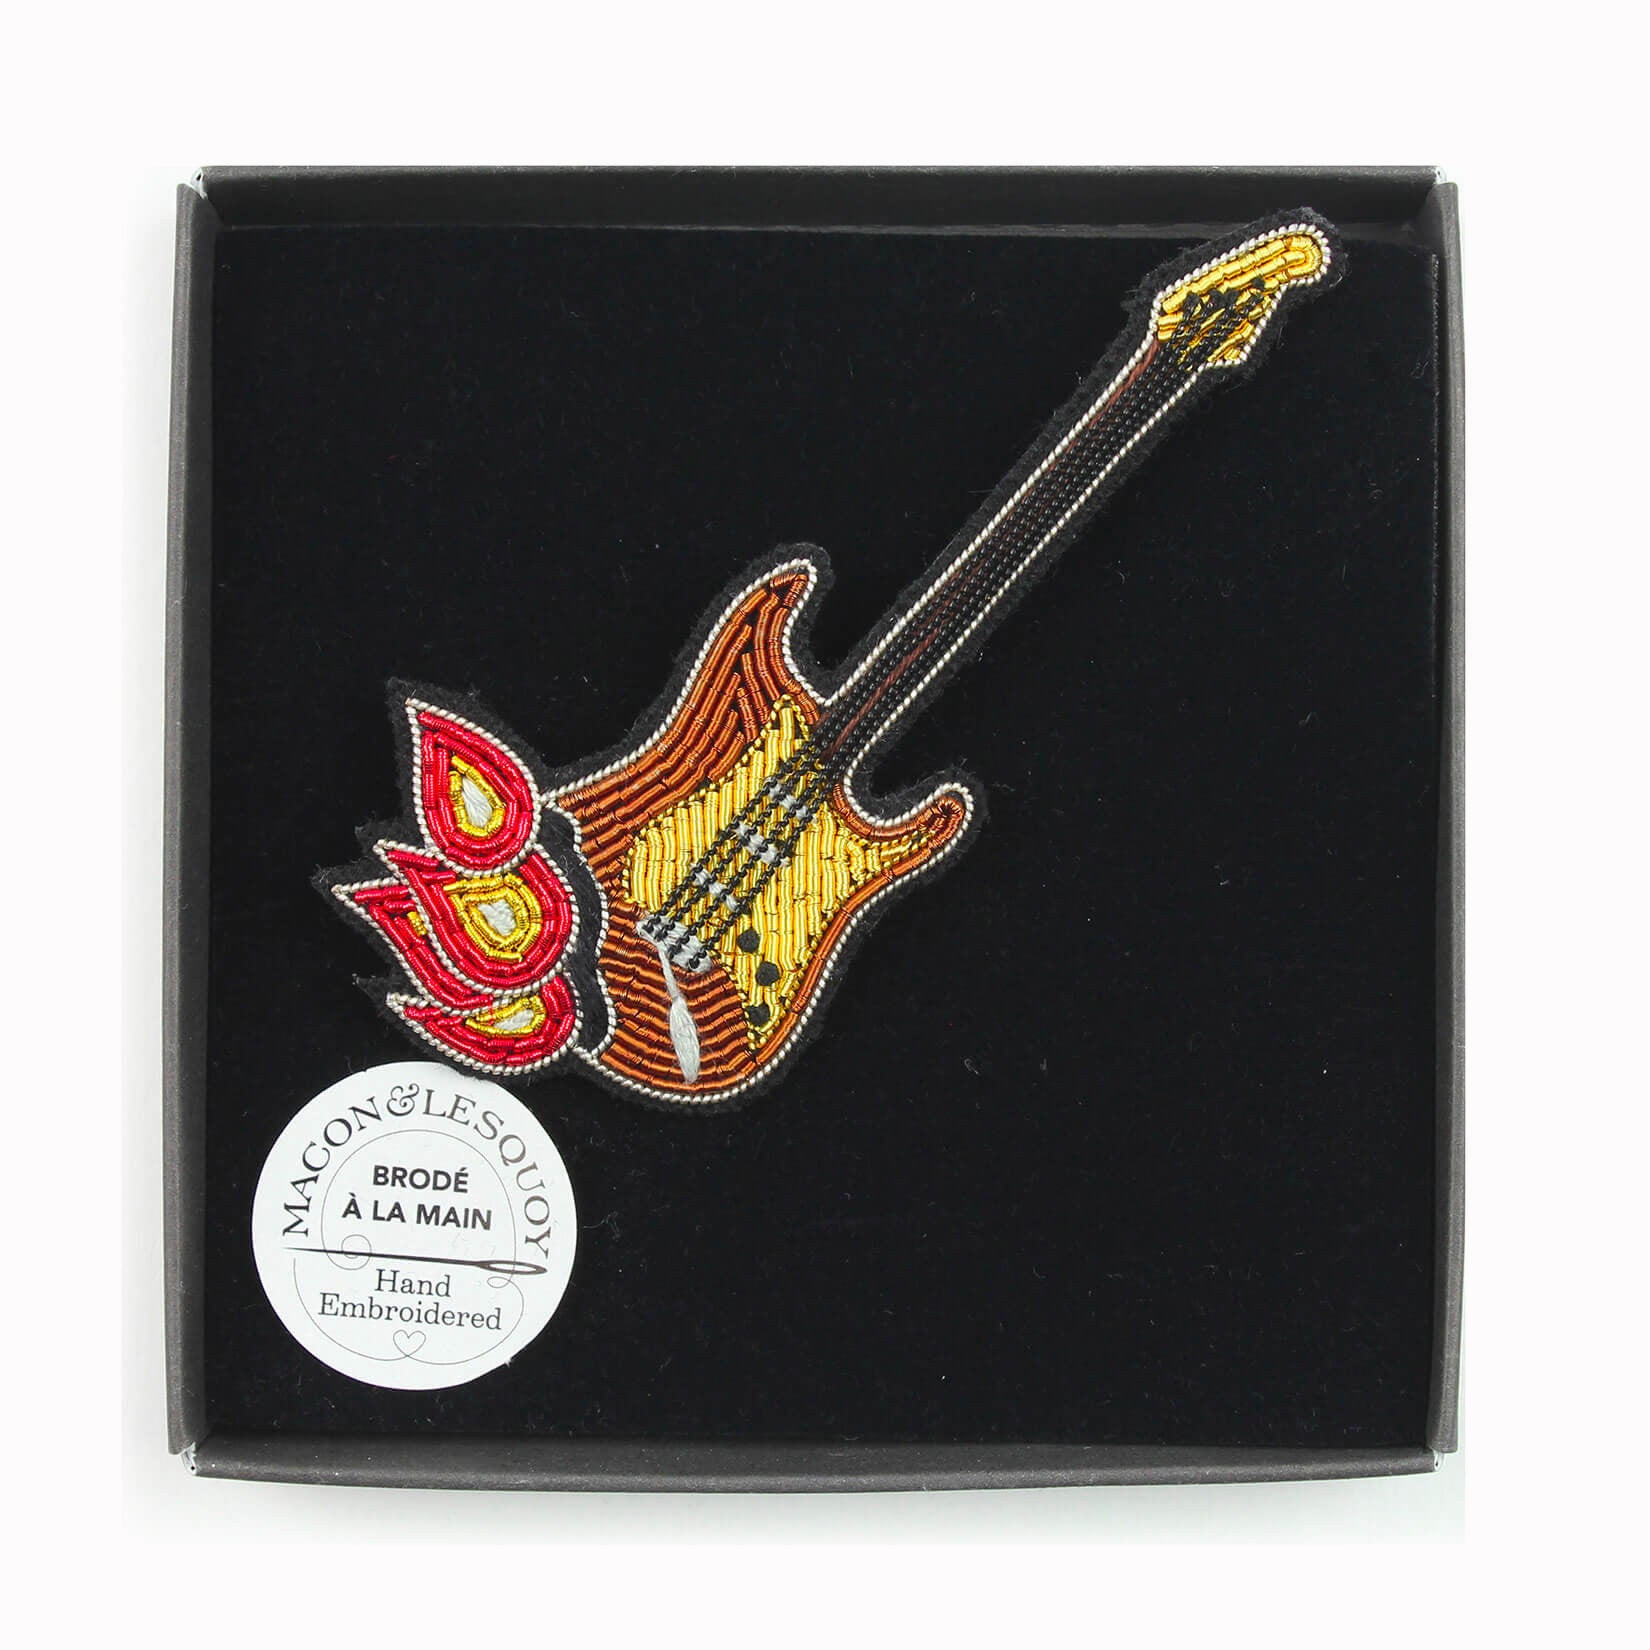 Burning Guitar hand-embroidered lapel pin, for rock gods and music lovers, in a presentation box From Macon & Lesquoy, French Hand Embroidered badges and patches using Cannetille thread,